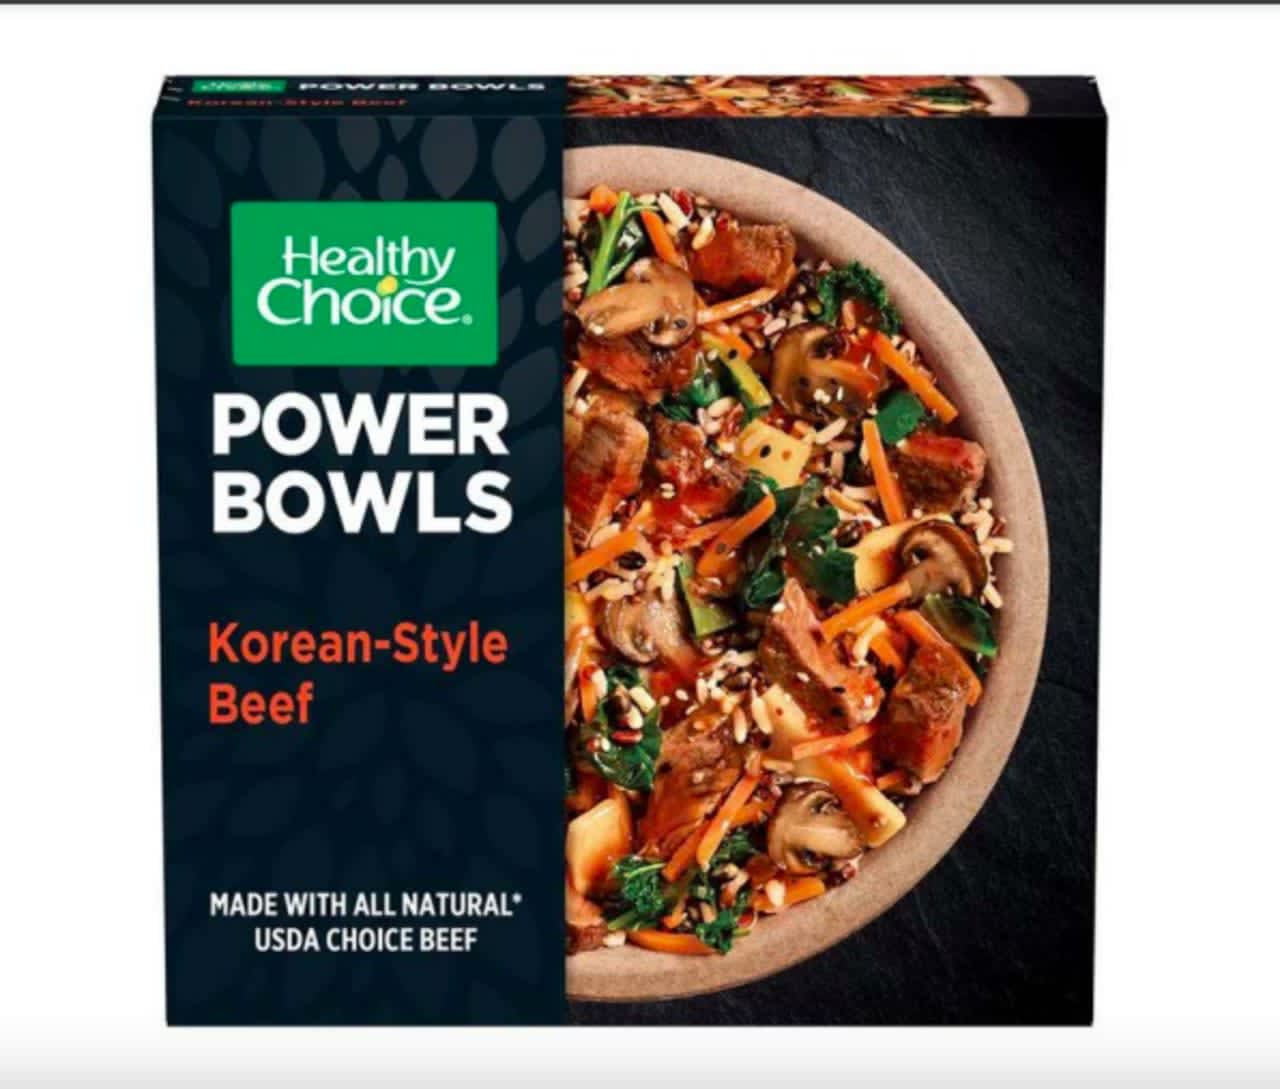 Cartons labeled as “Healthy Choice POWER BOWLS Korean-Style Beef” with lot code “5246220320” and a “best if used by” date of 04-18-2023.